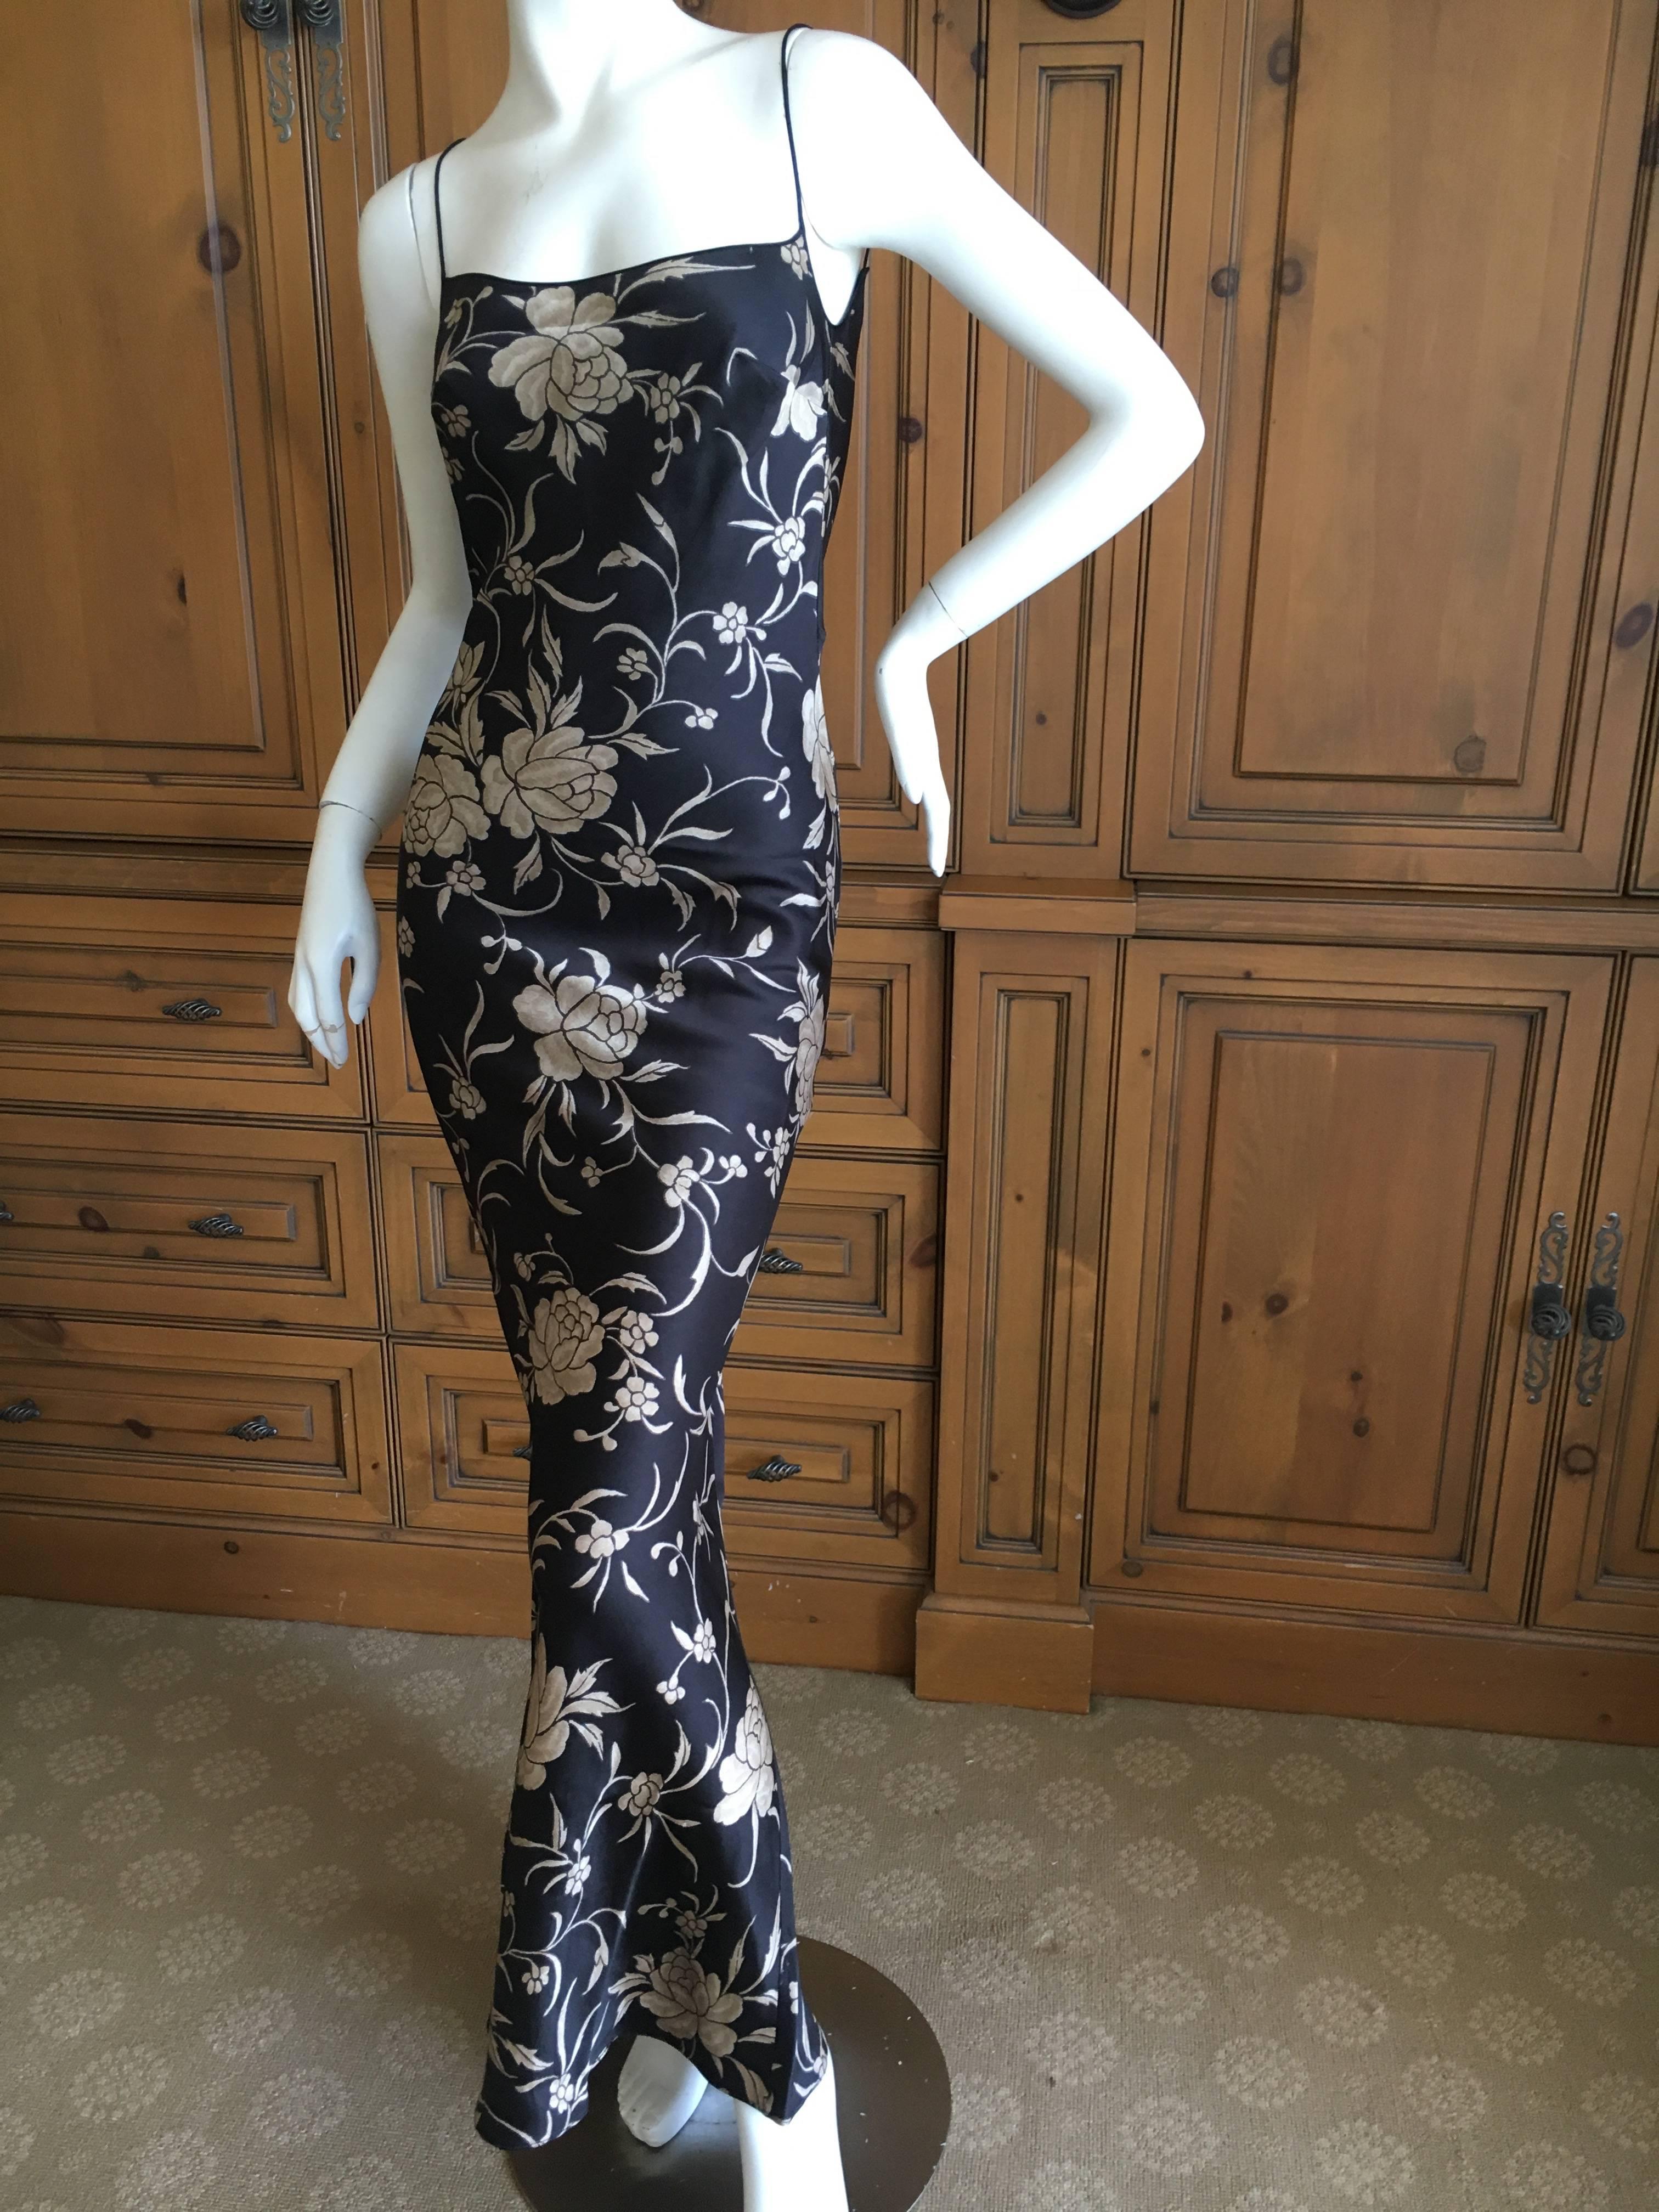 Exquisite floral bias cut dress from John Gallanio circa 1996.
So much prettier in person.
Size 36
Bust 36"
Waist 30"
Hips 42"
Length 60"
Excellent condition